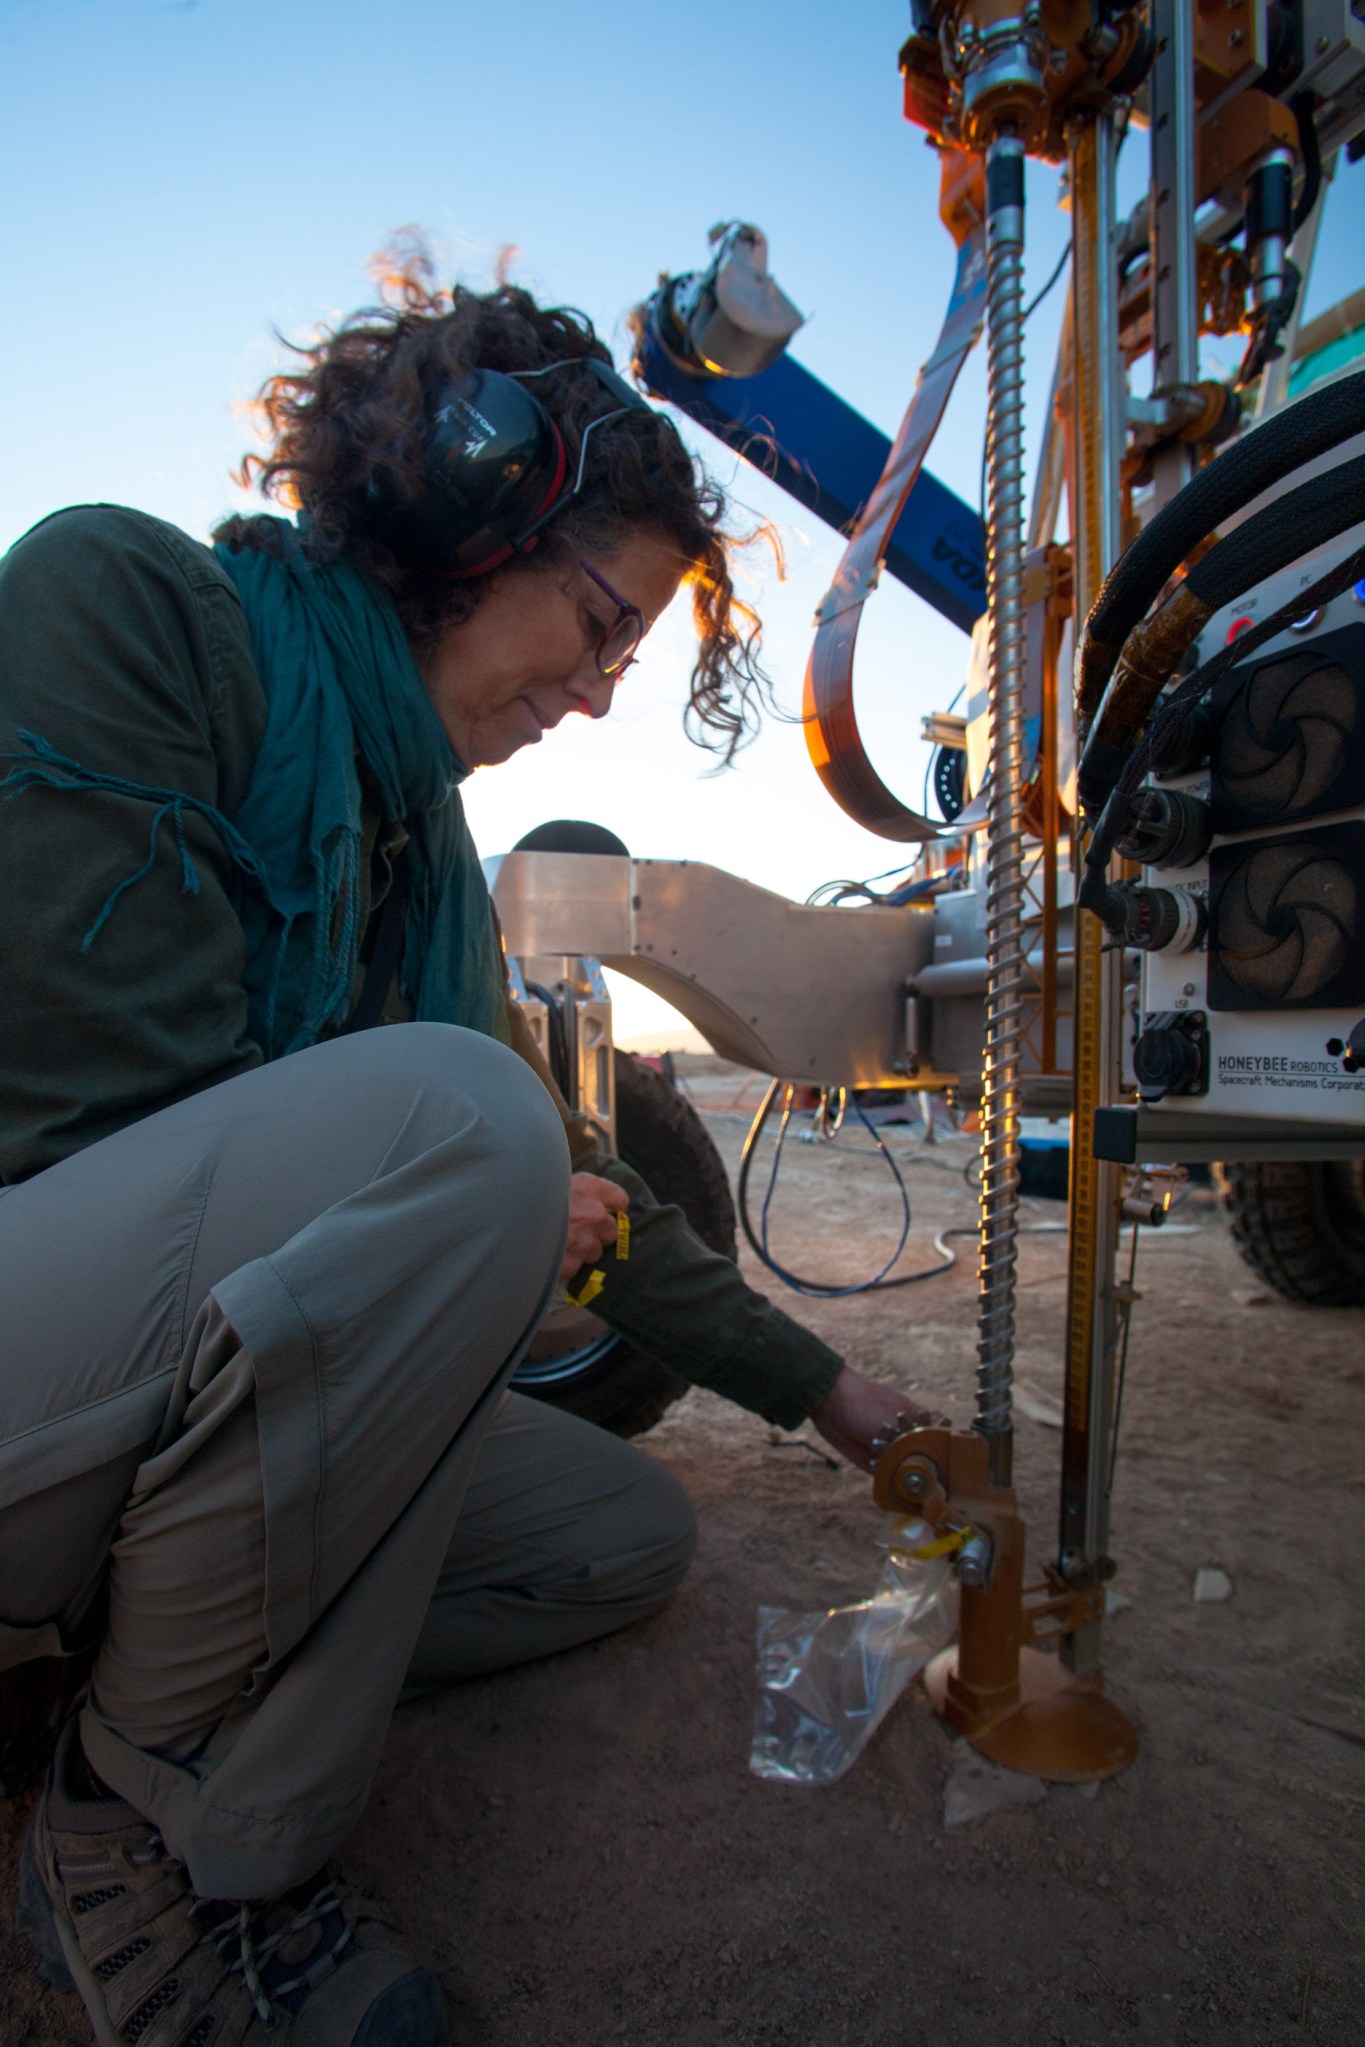 A NASA engineer inspecting the drill attached to the ARADS rover in the desert.